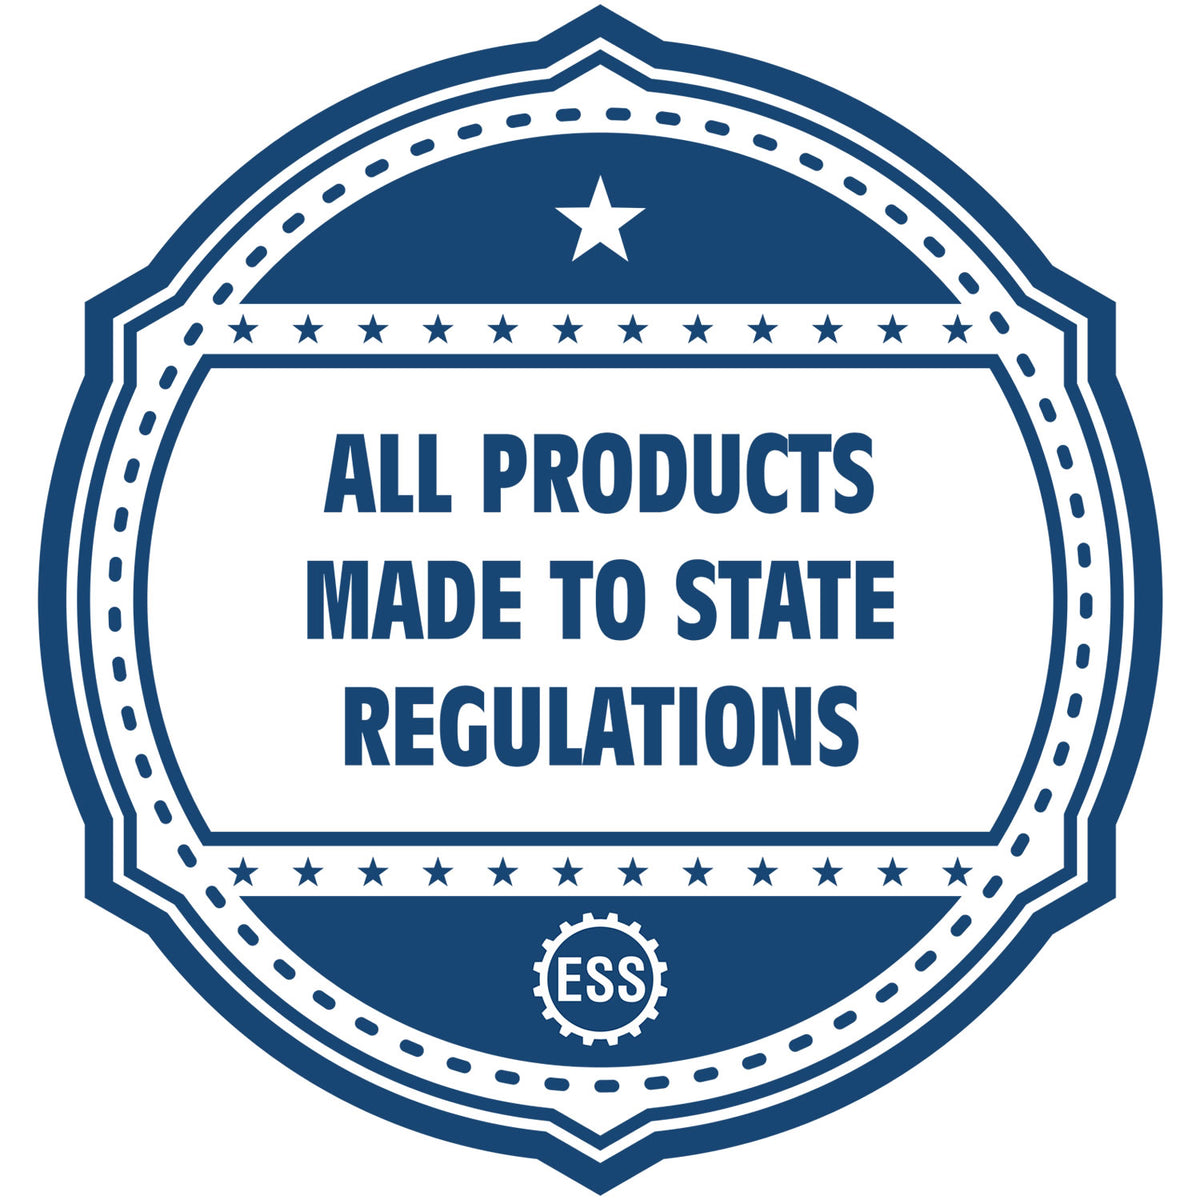 An icon or badge element for the Self-Inking Kansas PE Stamp showing that this product is made in compliance with state regulations.